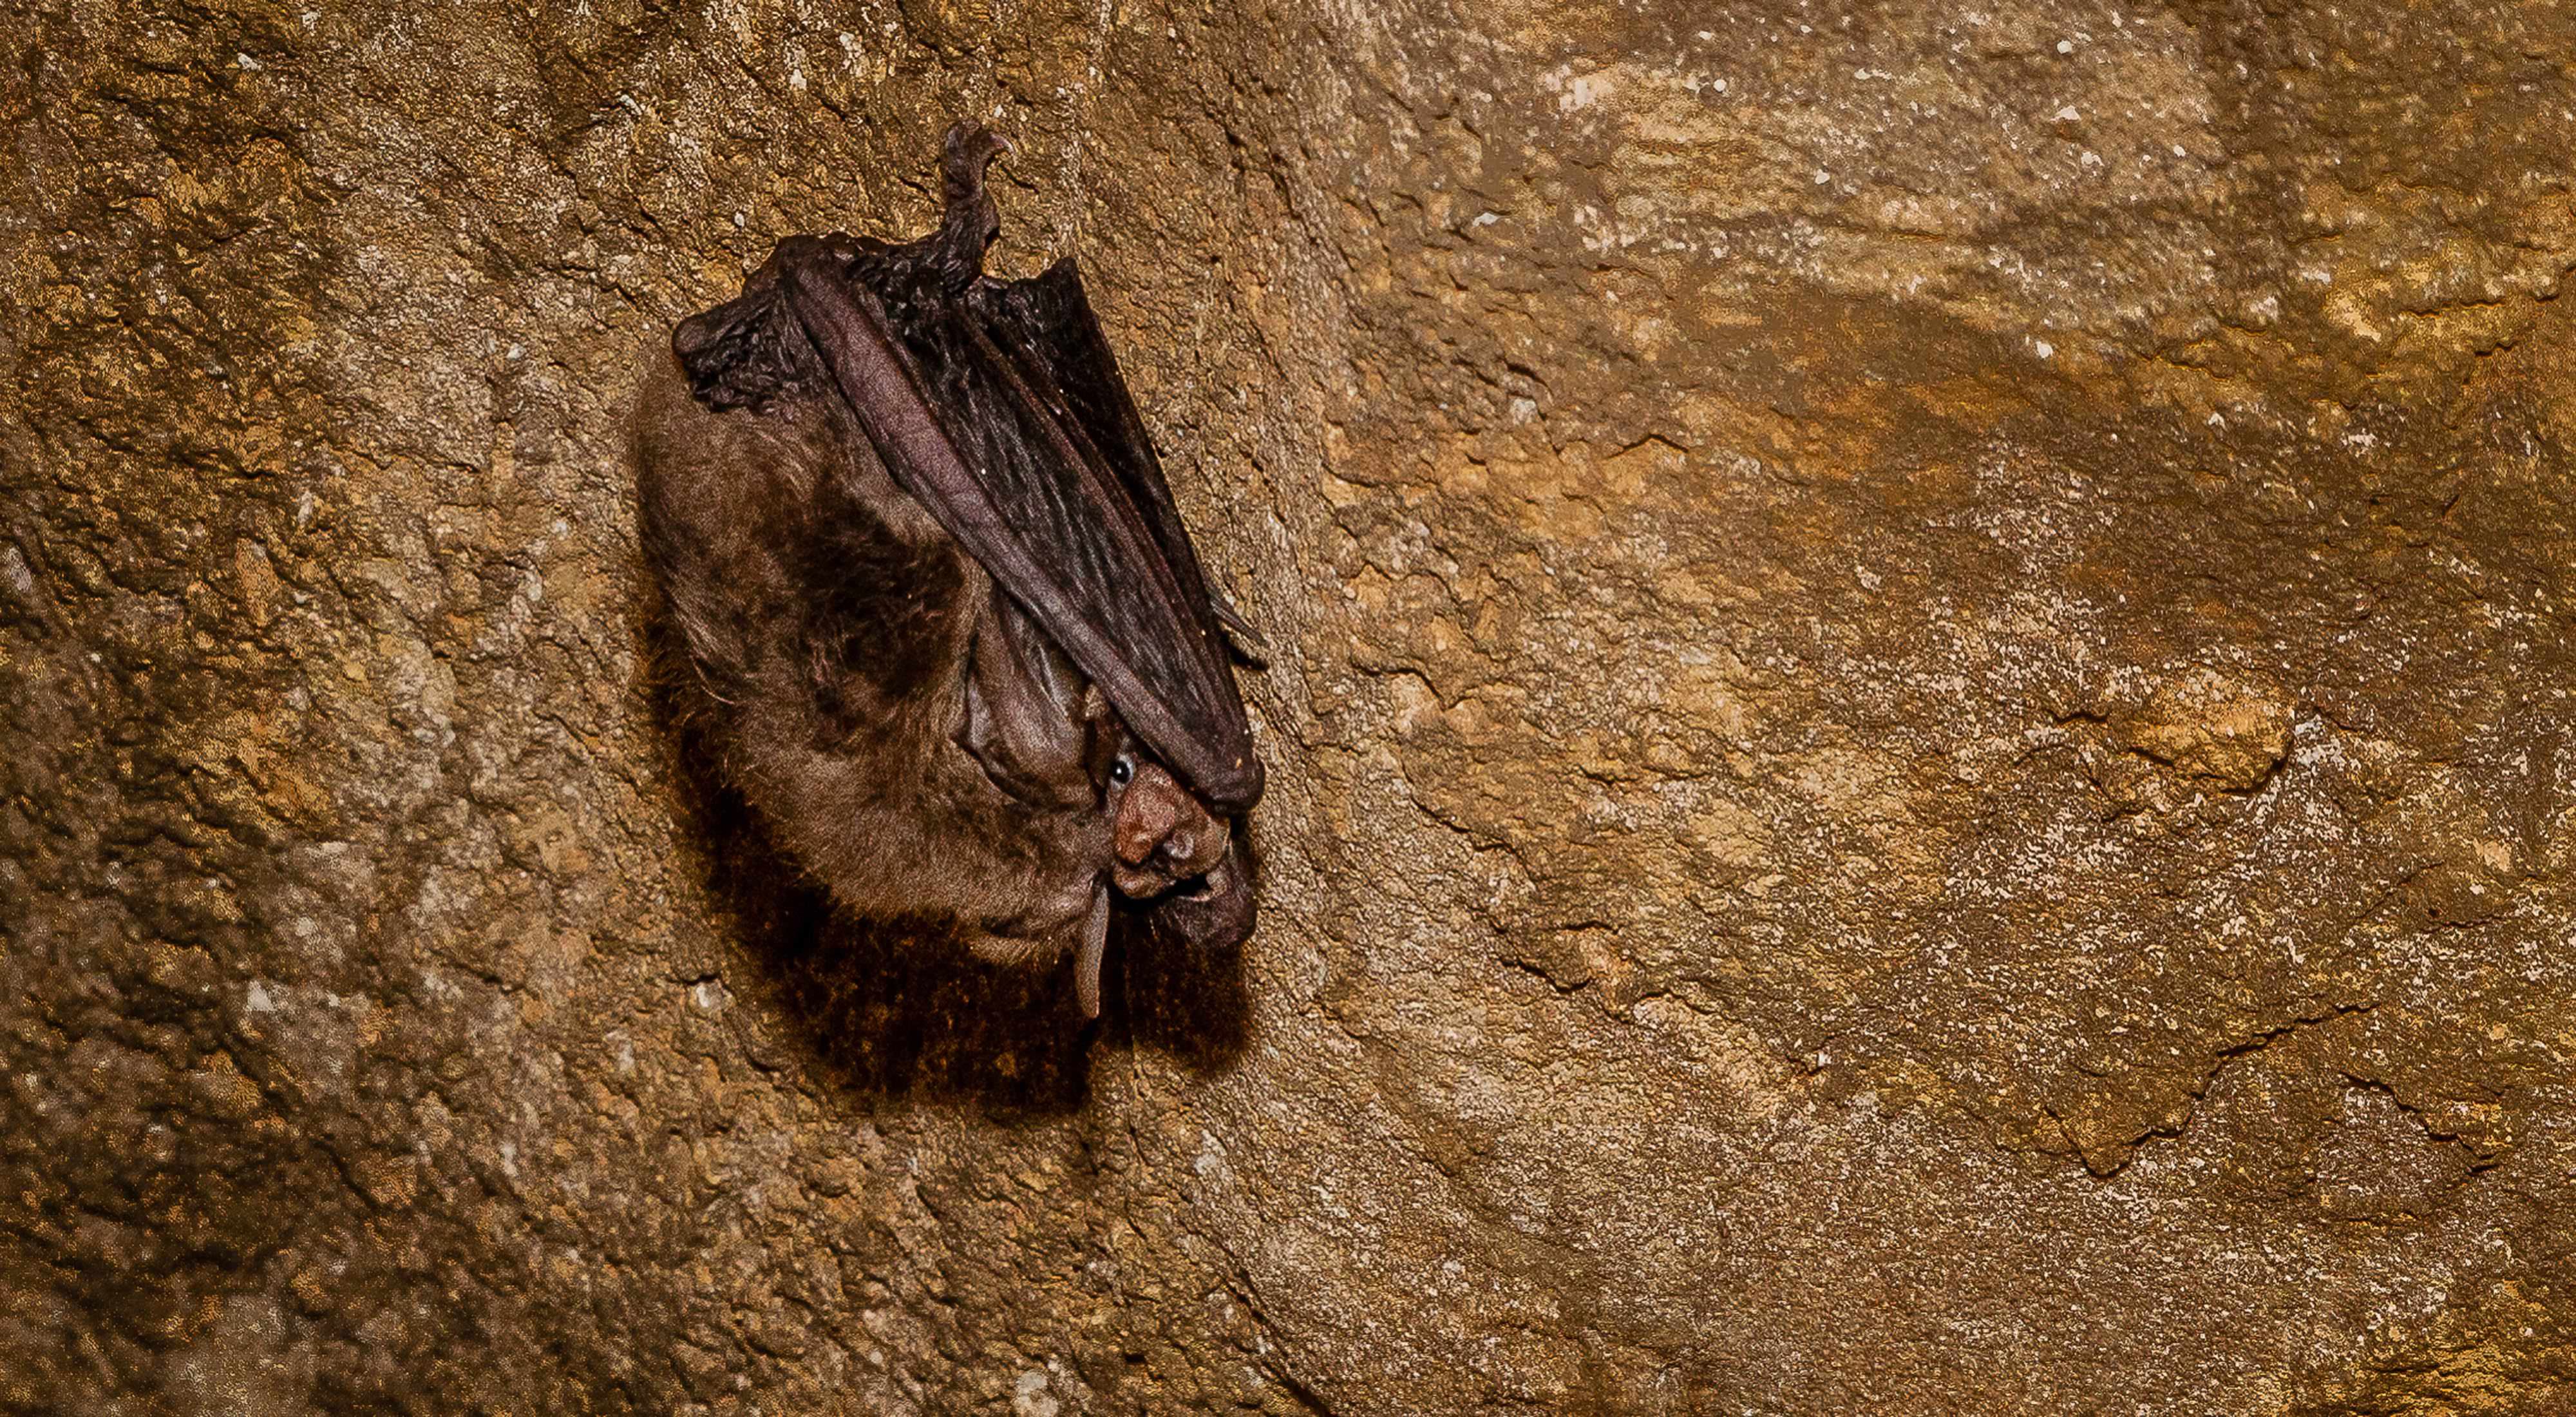 A small brown bat clings to the side of a rocky cave face.